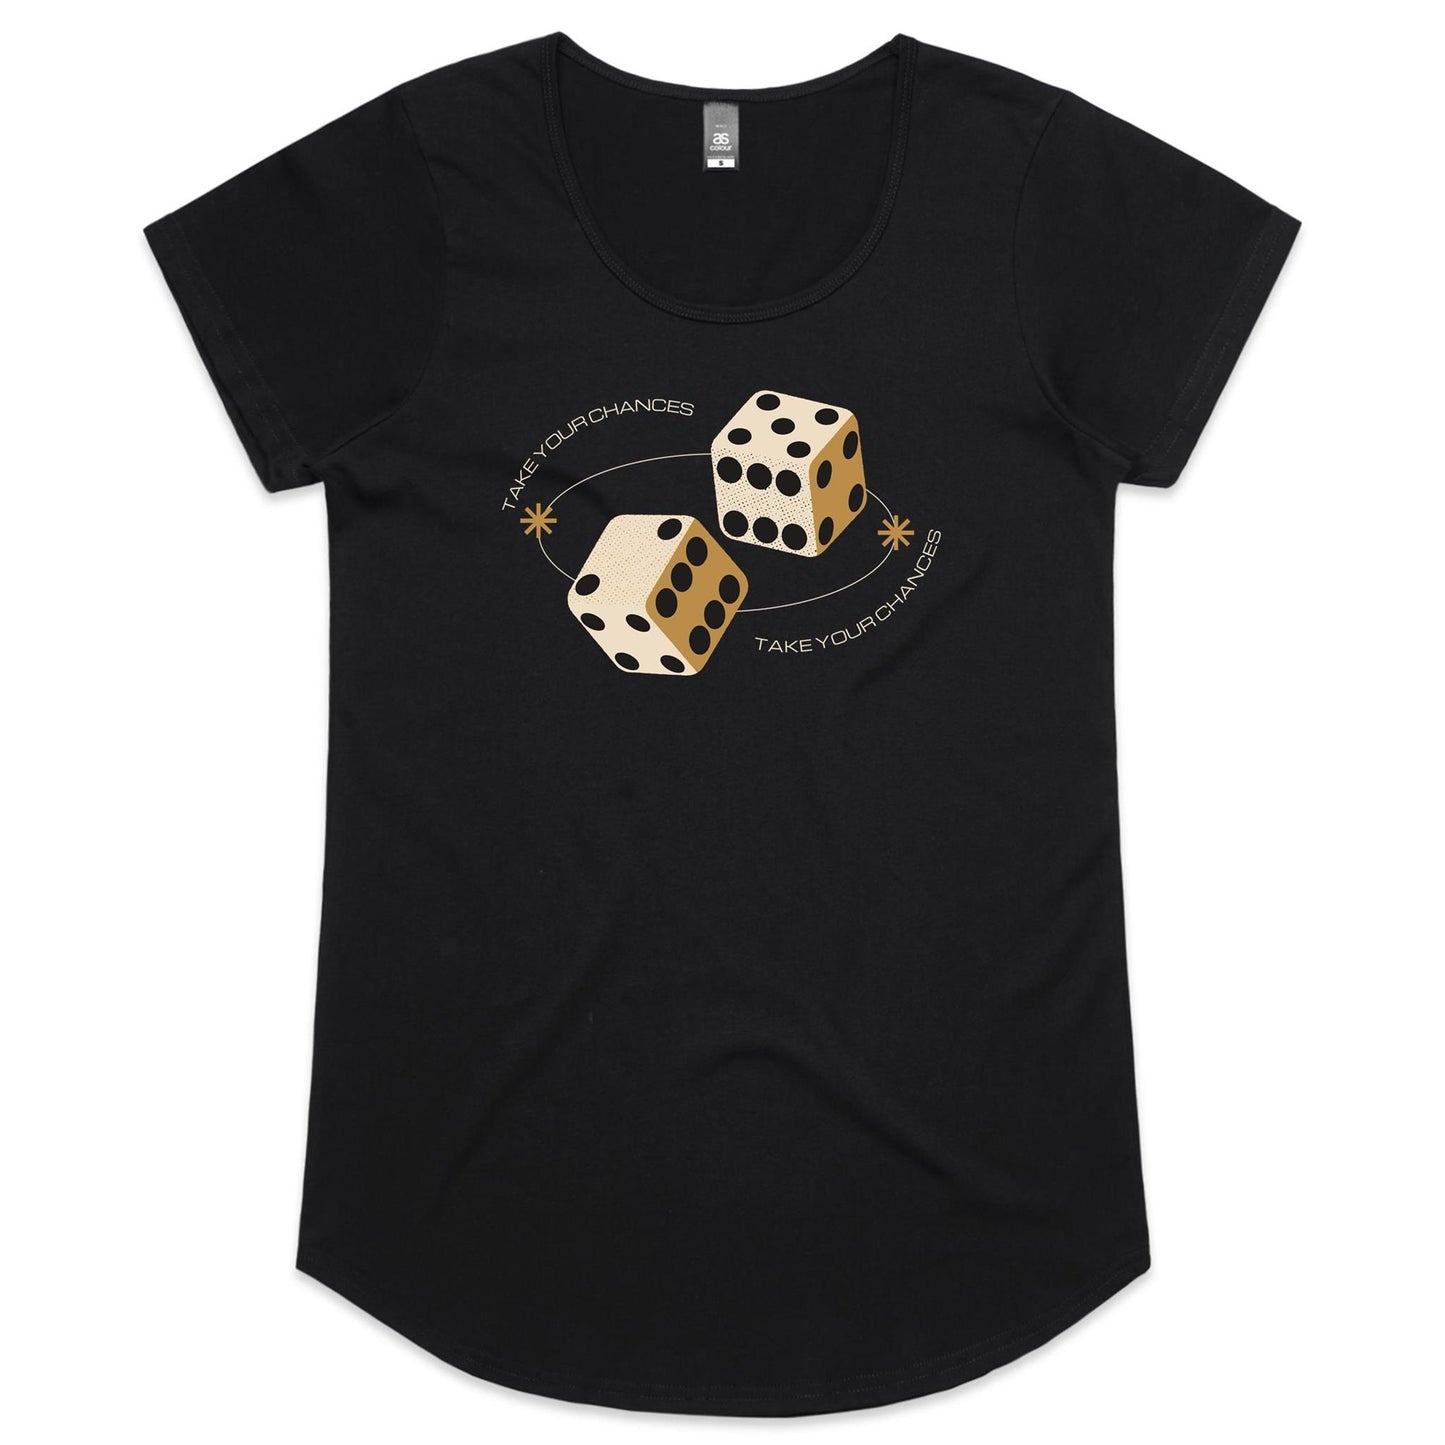 Dice, Take Your Chances - Womens Scoop Neck T-Shirt Black Womens Scoop Neck T-shirt Games